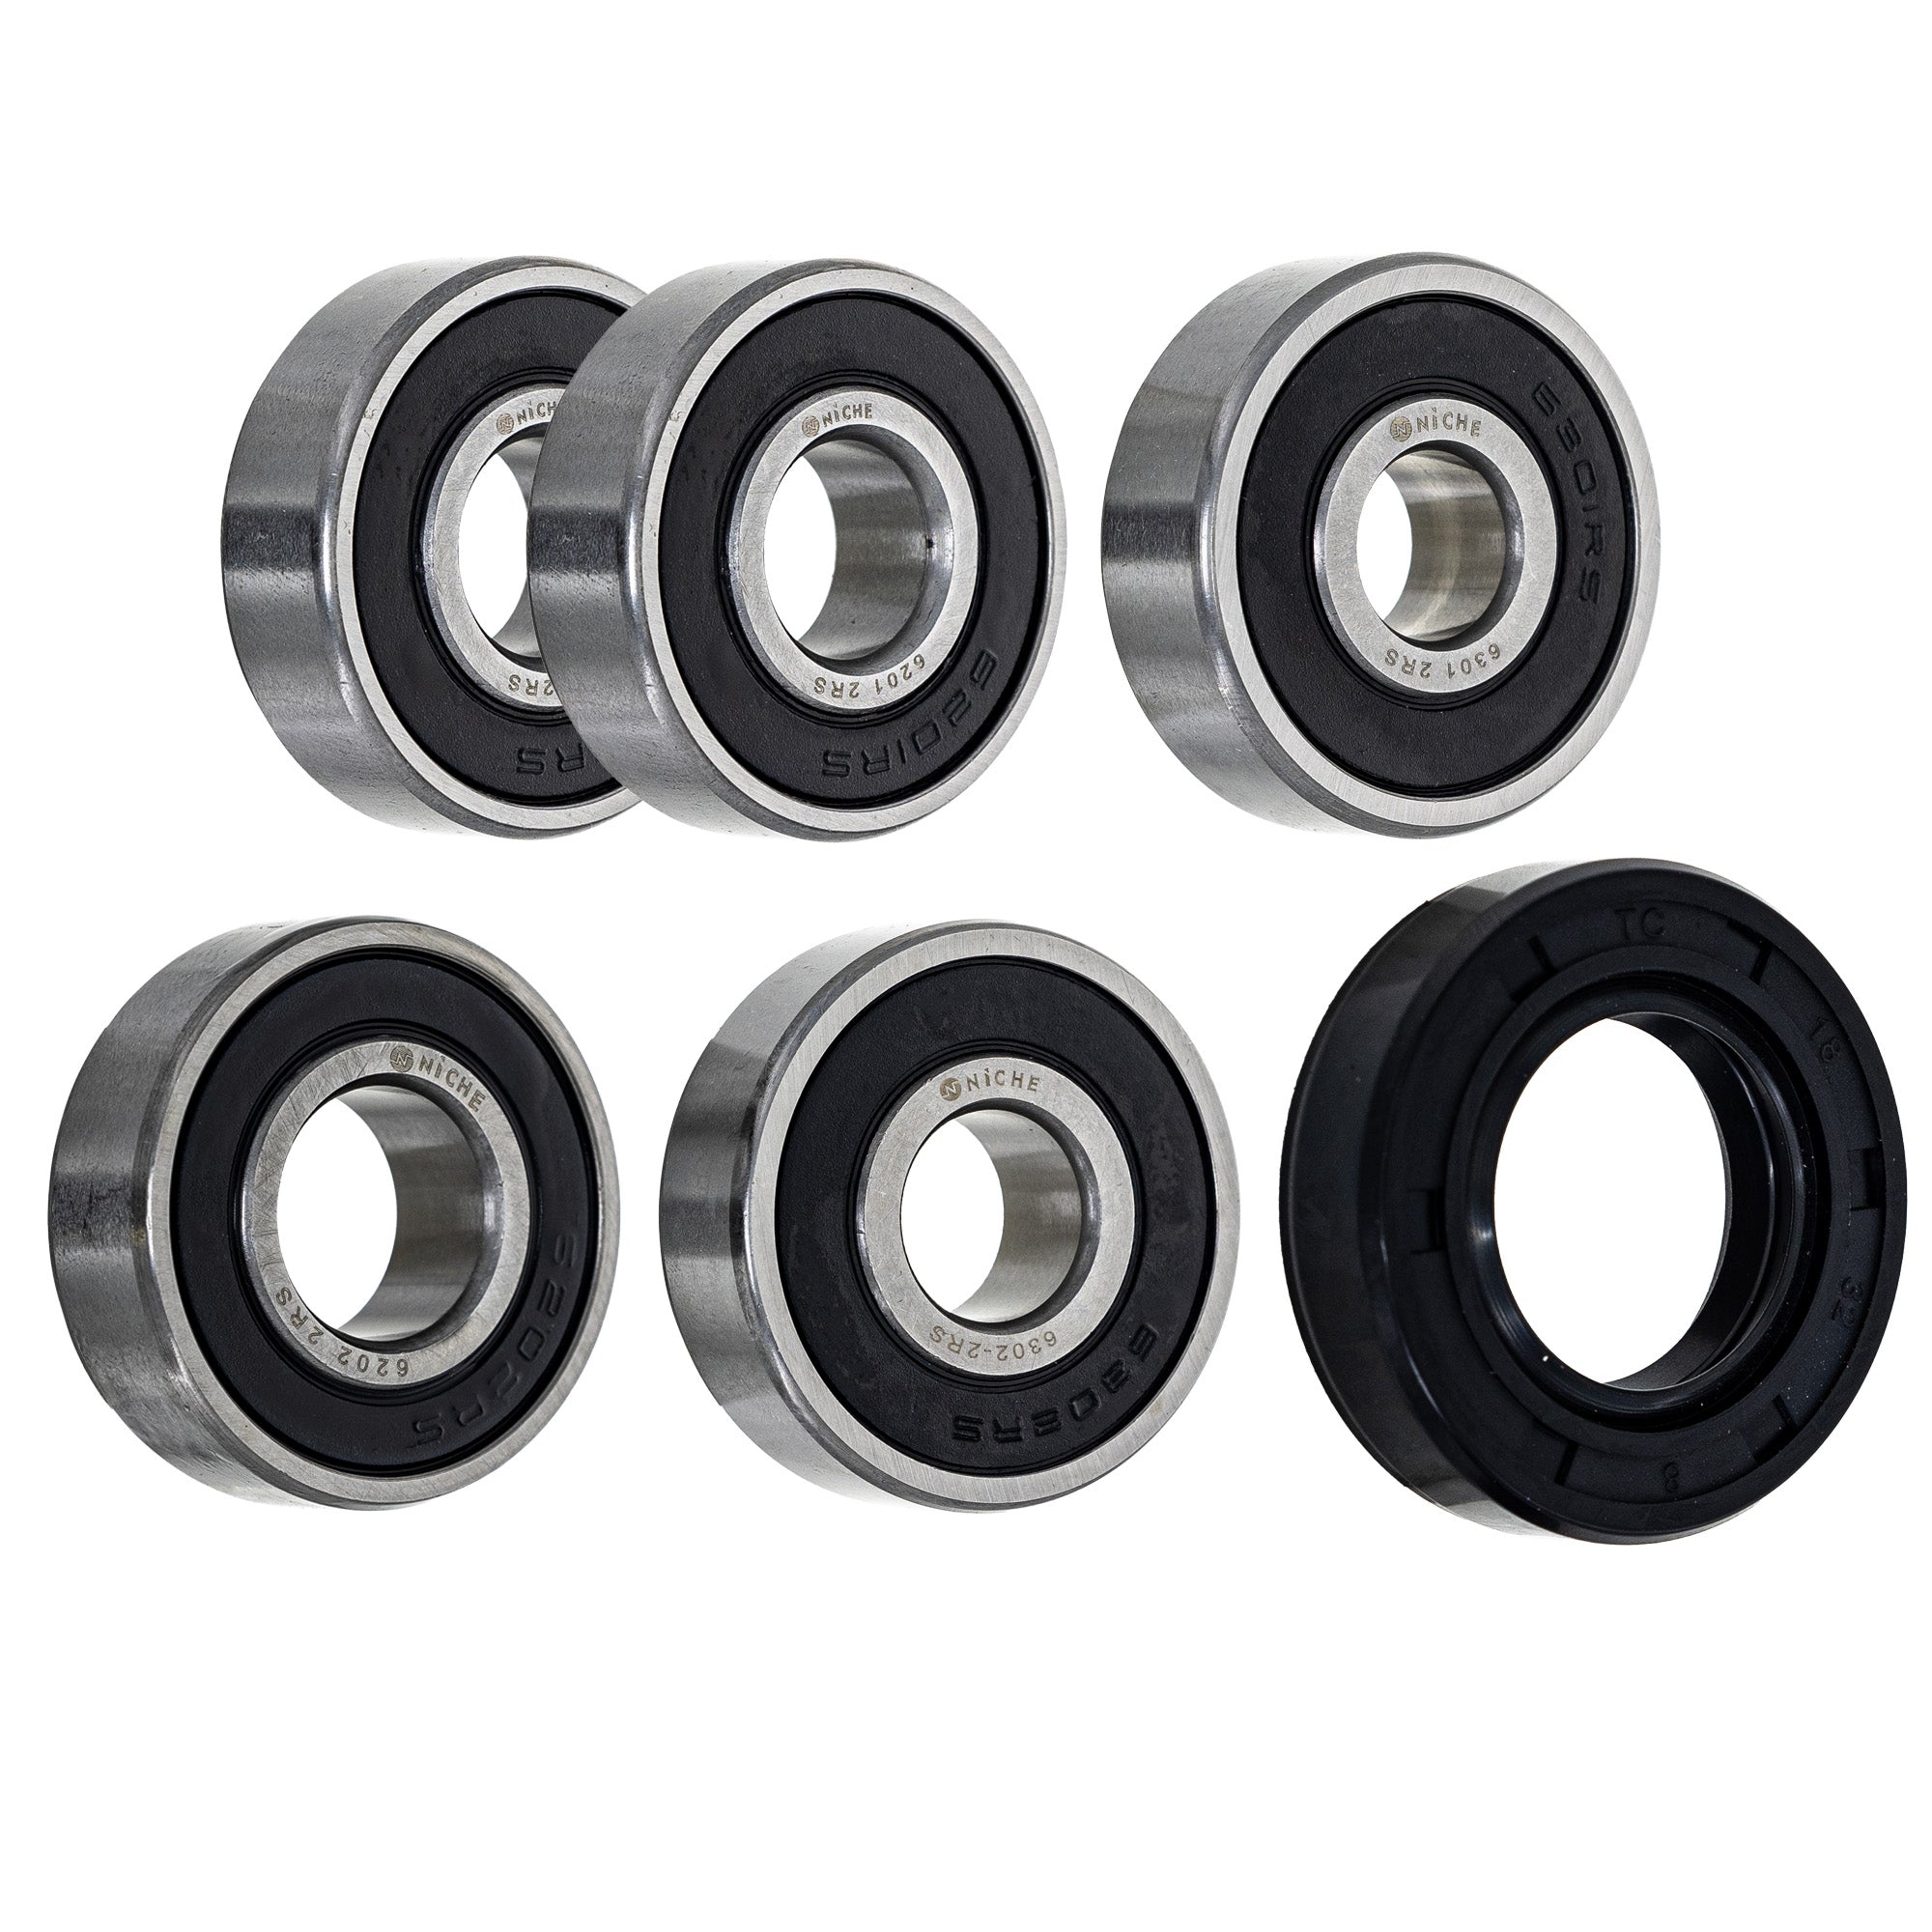 Wheel Bearing Seal Kit for zOTHER Ref No TS100 SP200 SP125 SP100 NICHE MK1008734